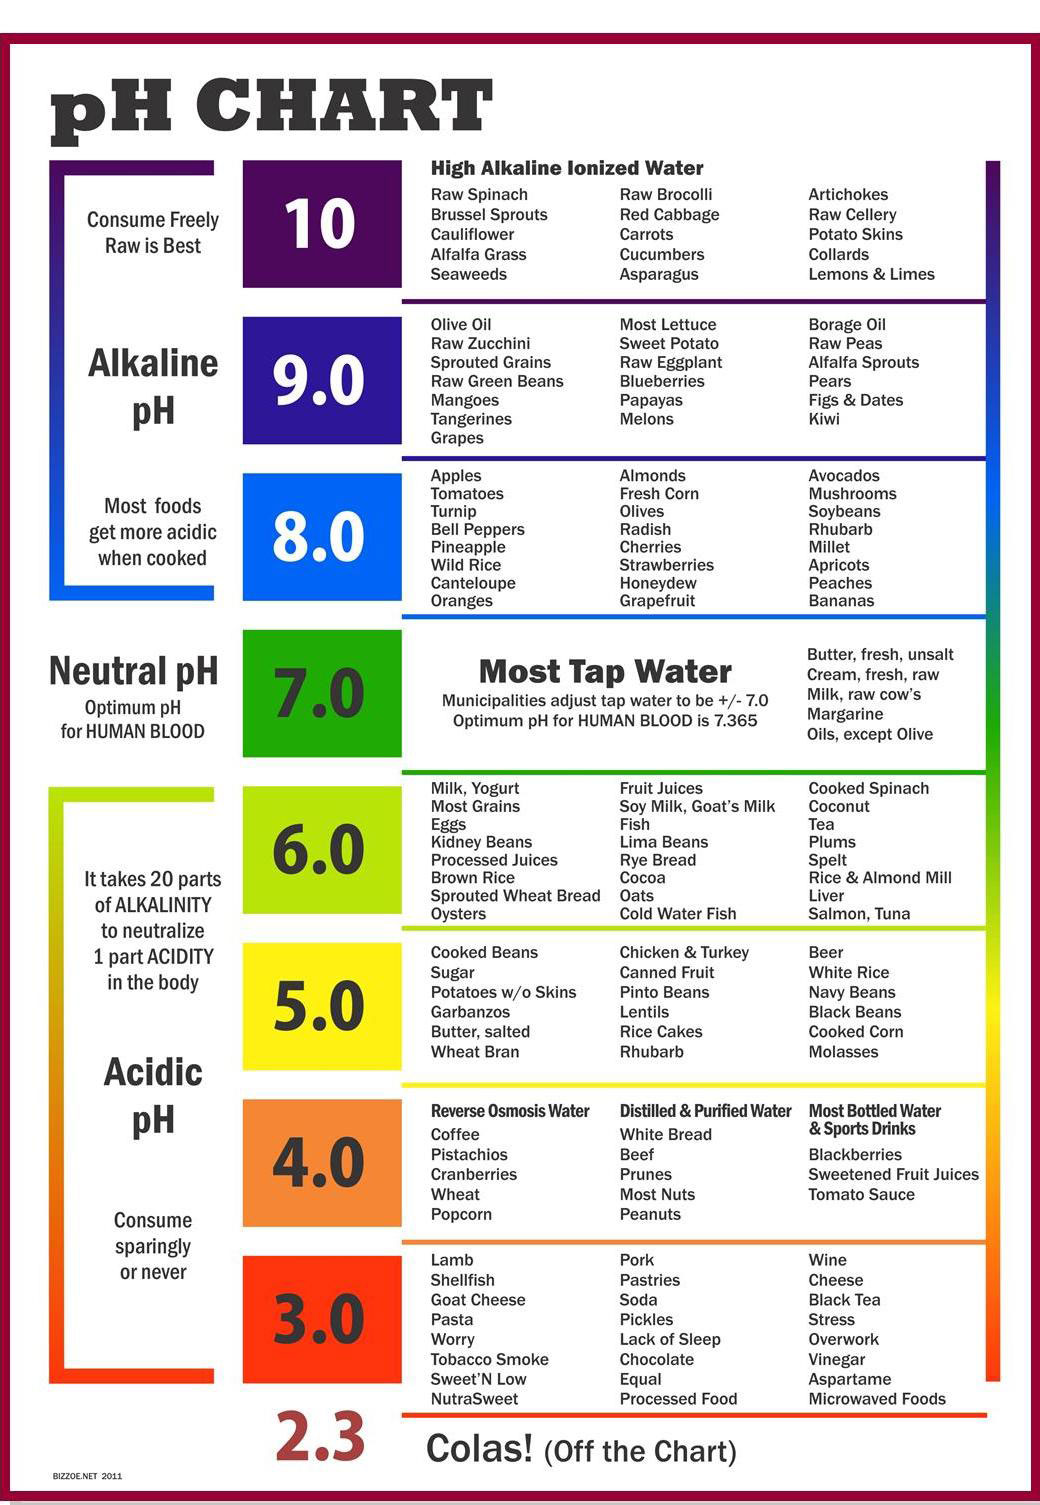 Bottled Water Drinking Water Ph Level Chart